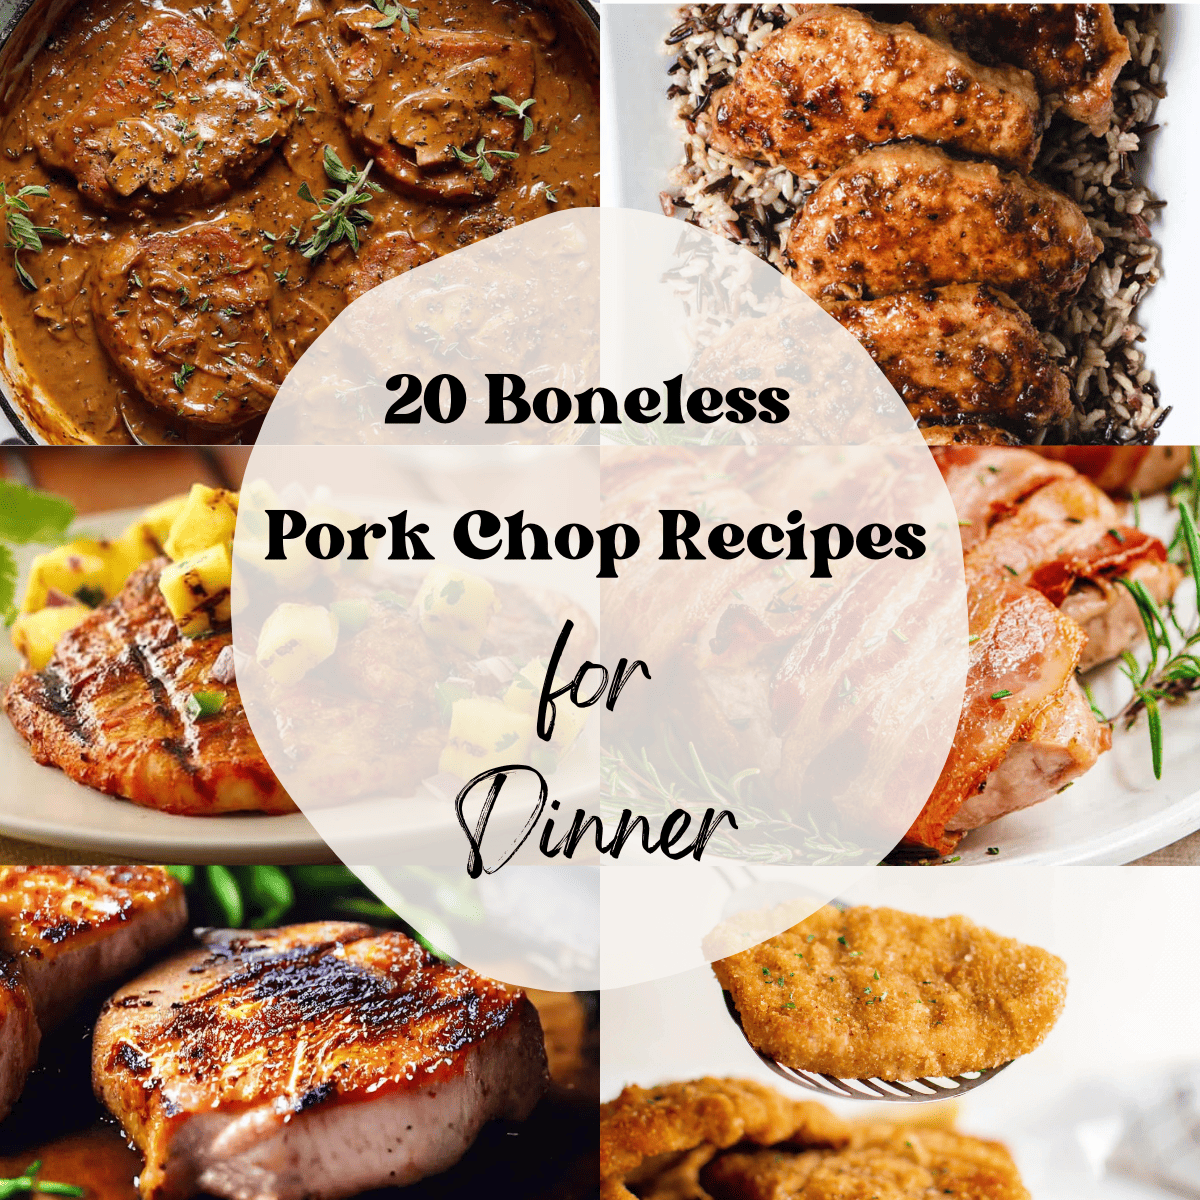 A 6 photo collage showing boneless pork chop recipes for dinner.